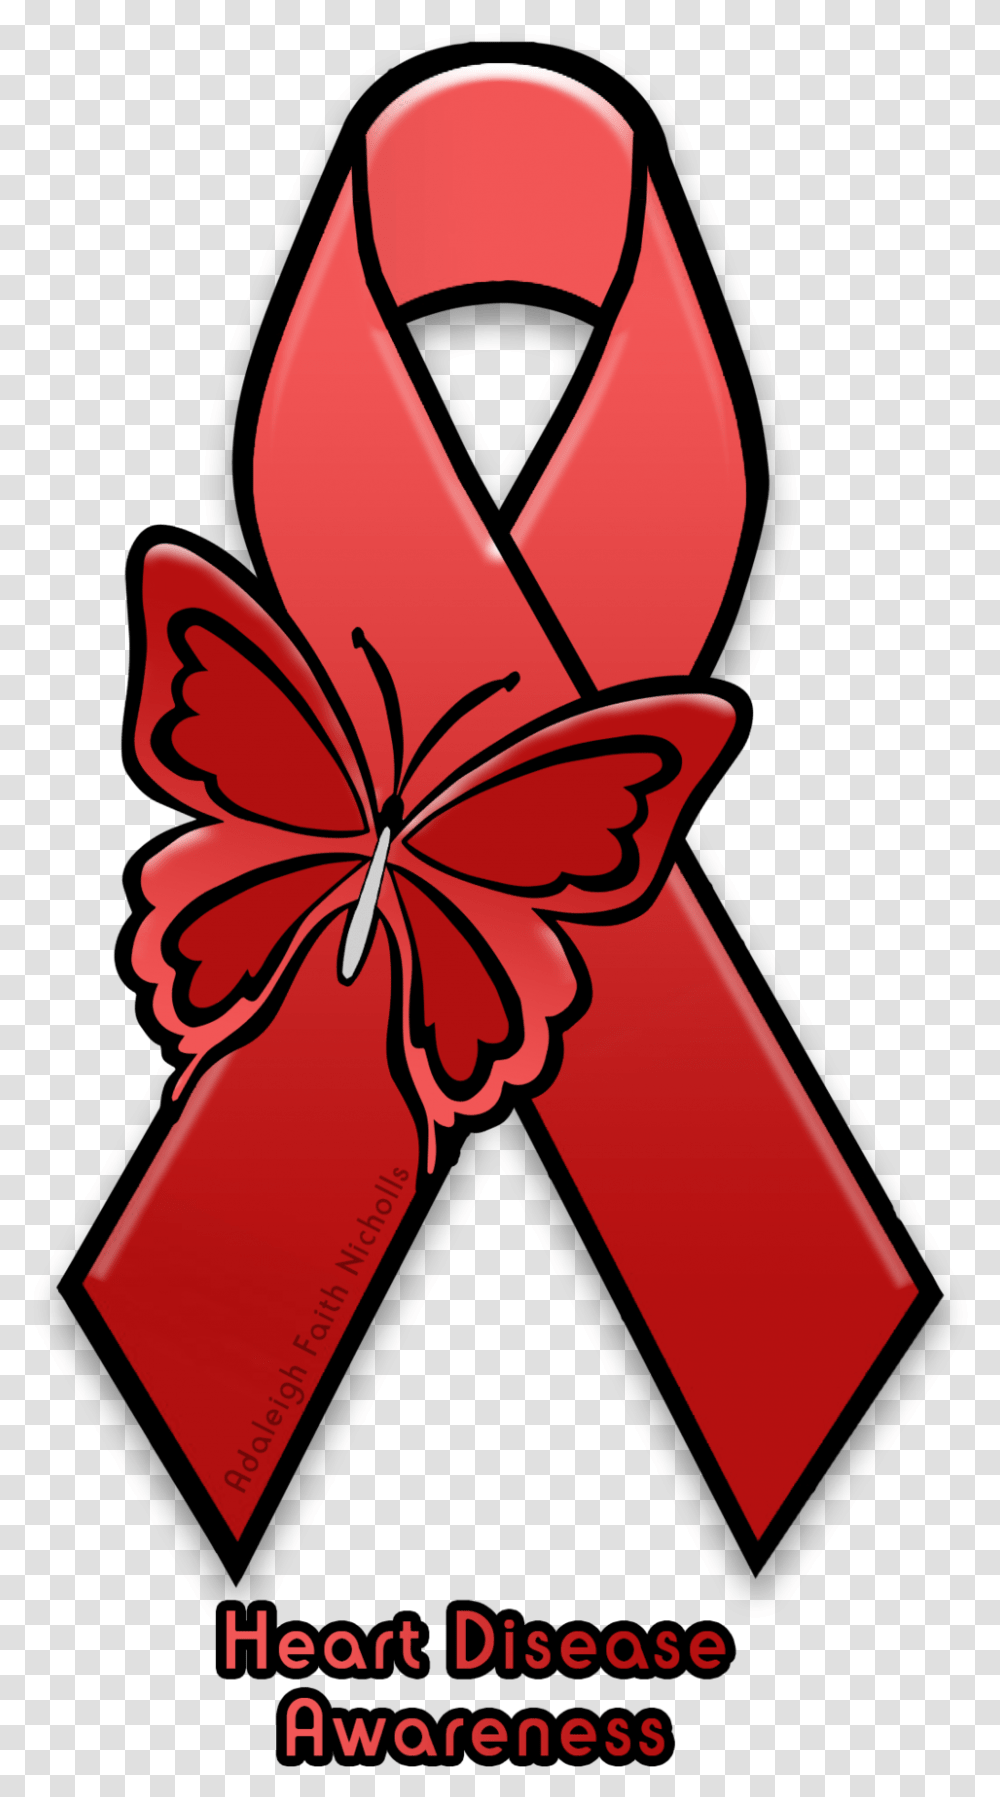 Symbol For Heart Disease Image Collections Hd Heart Disease Ribbon, Dynamite, Bomb, Weapon, Weaponry Transparent Png